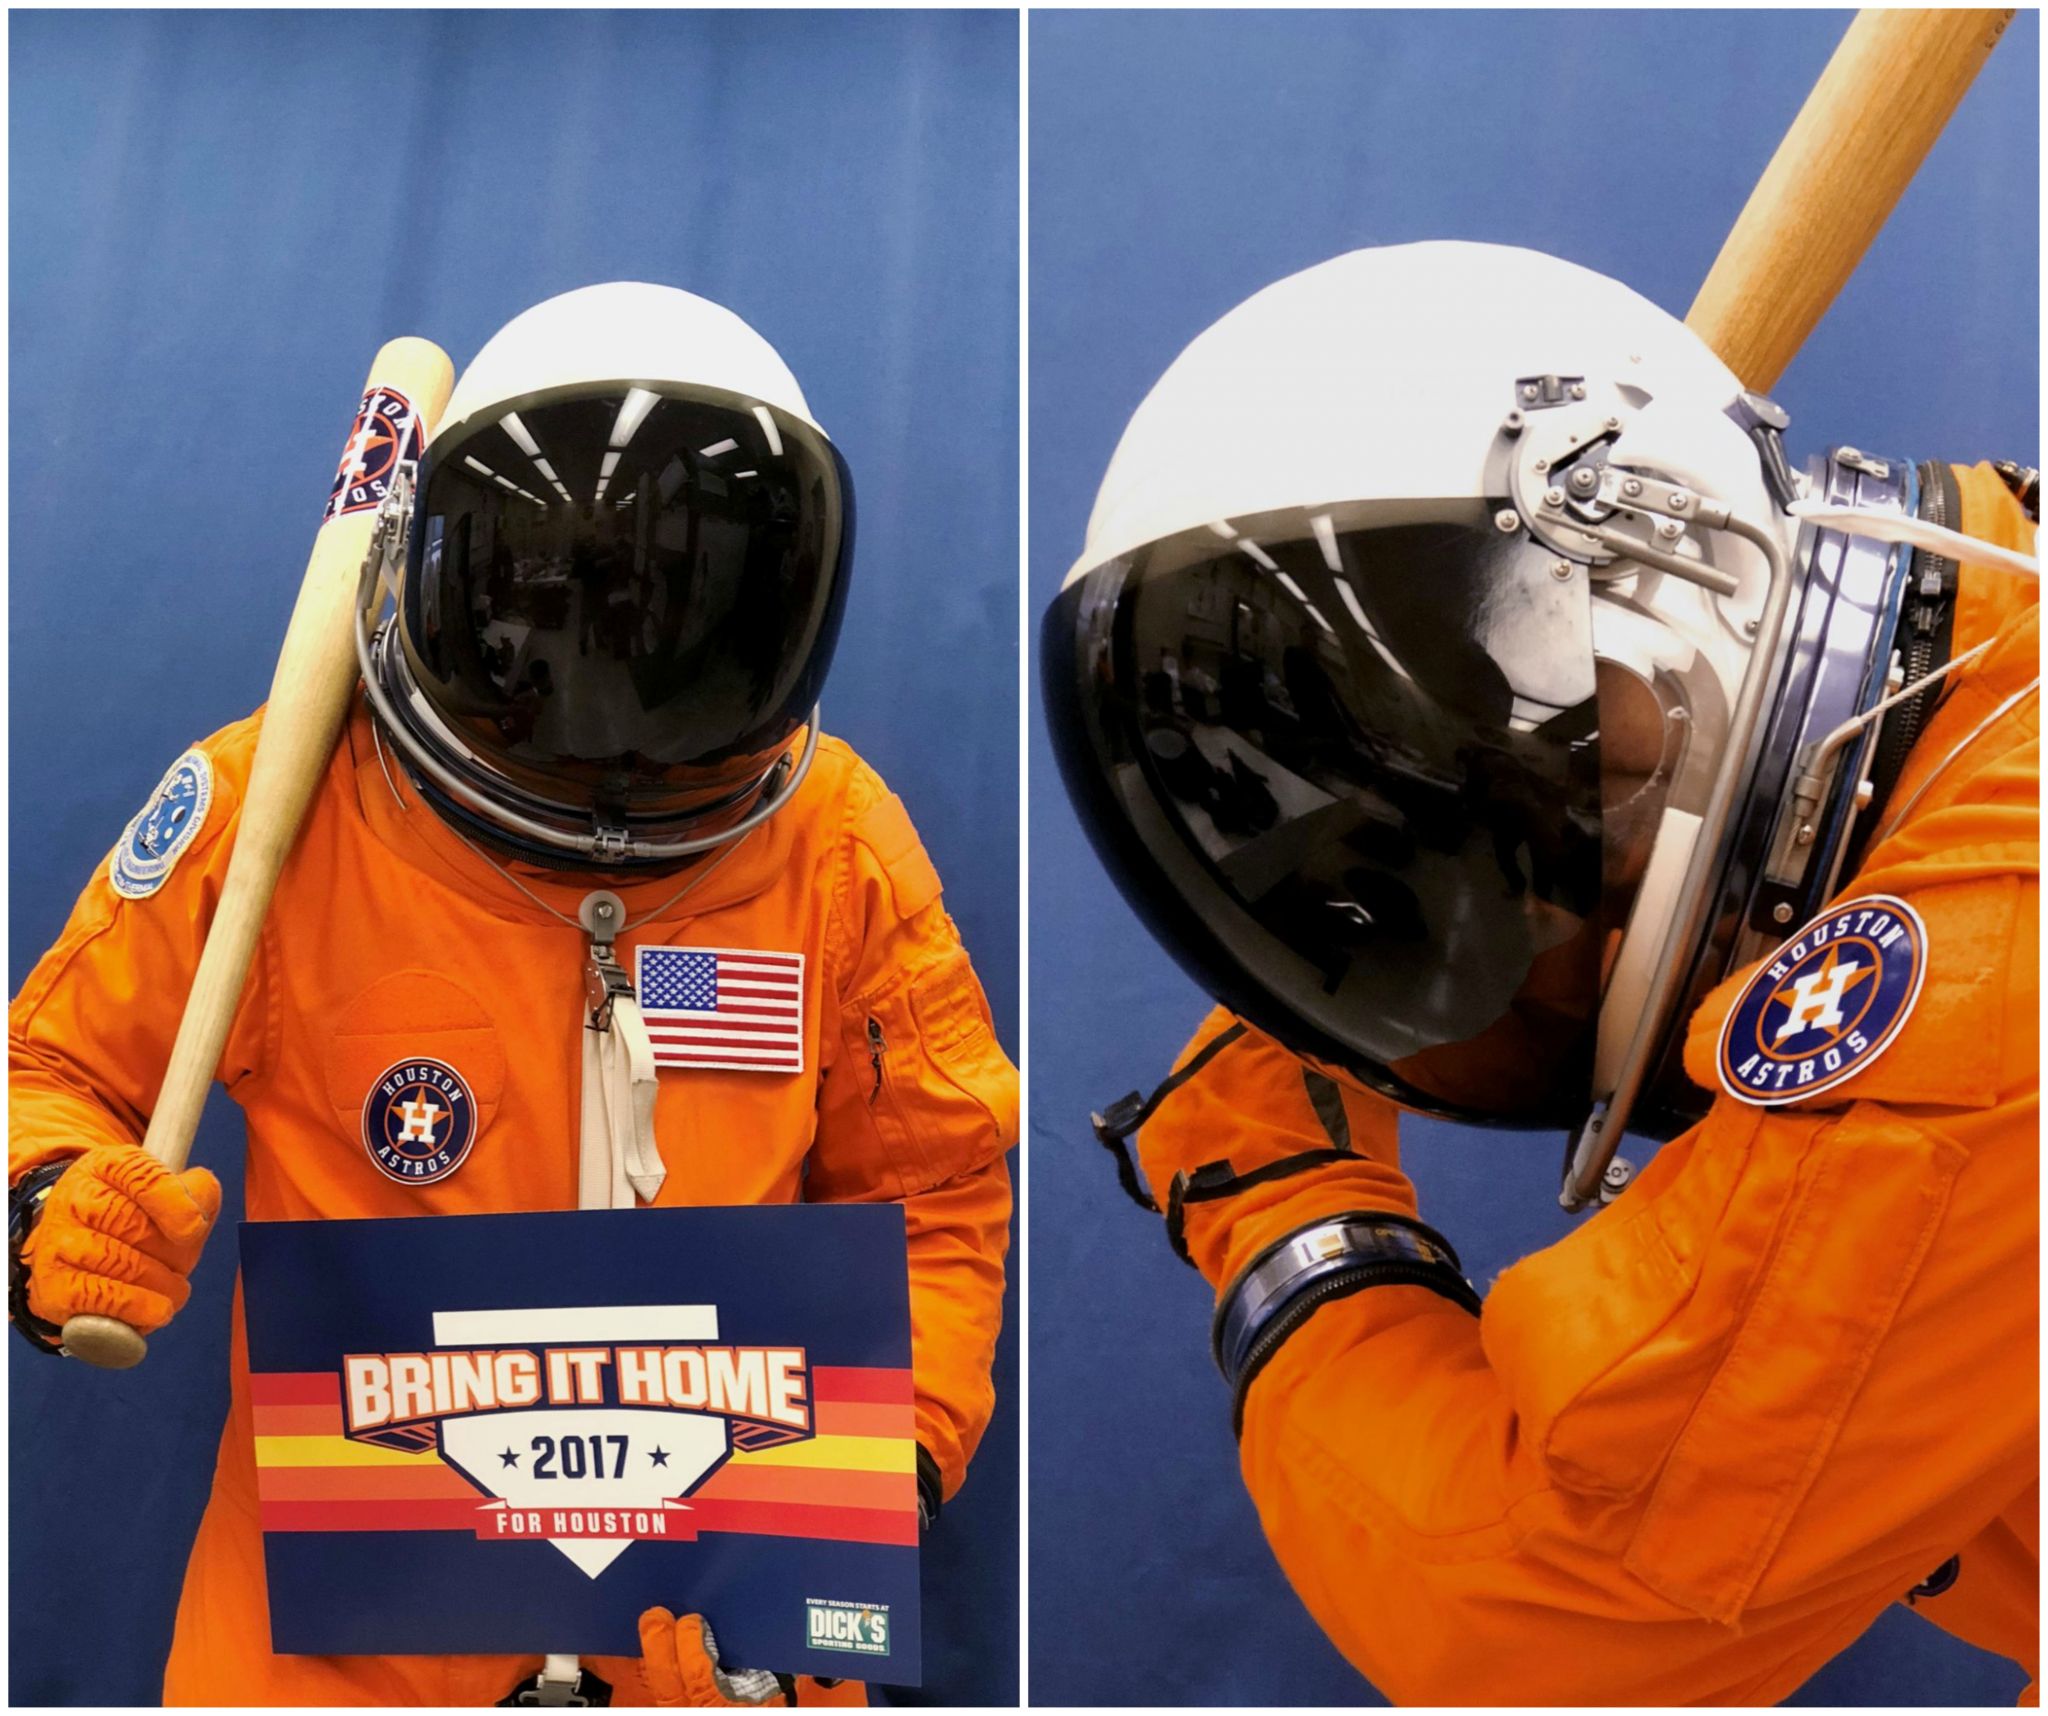 NASA creates amazing tribute to cheer on Space City during World